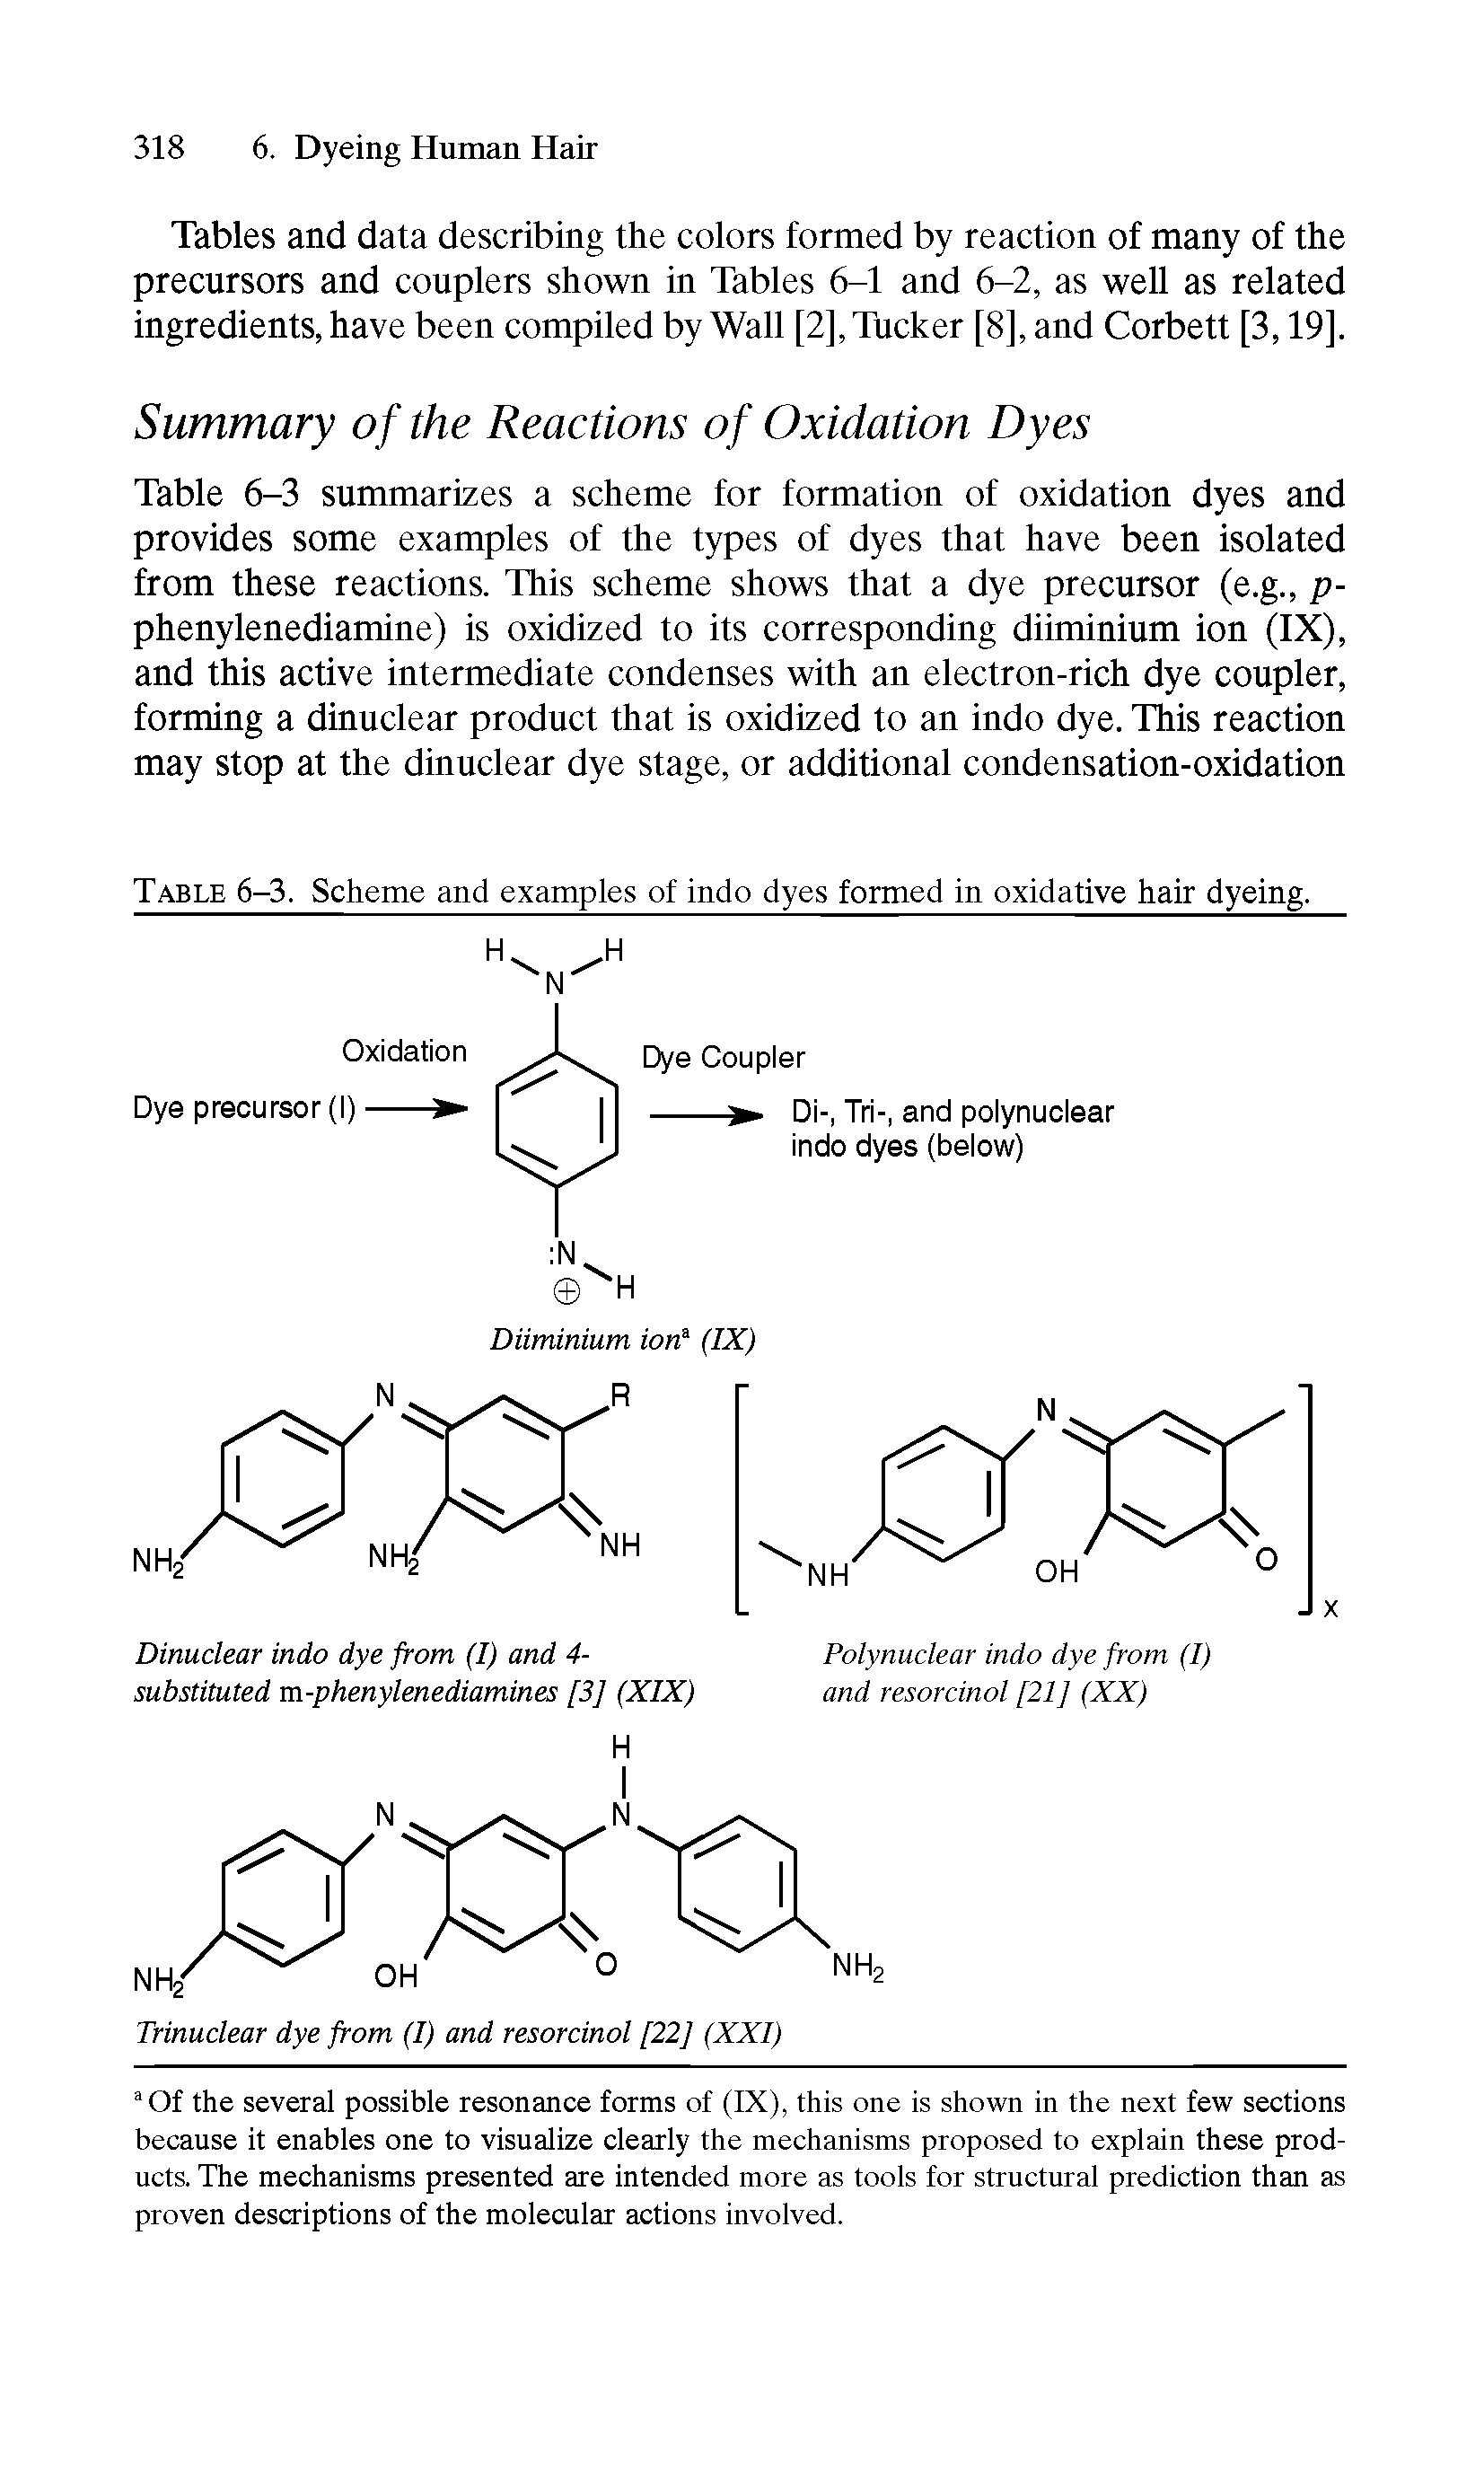 Table 6-3. Scheme and examples of indo dyes formed in oxidative hair dyeing.